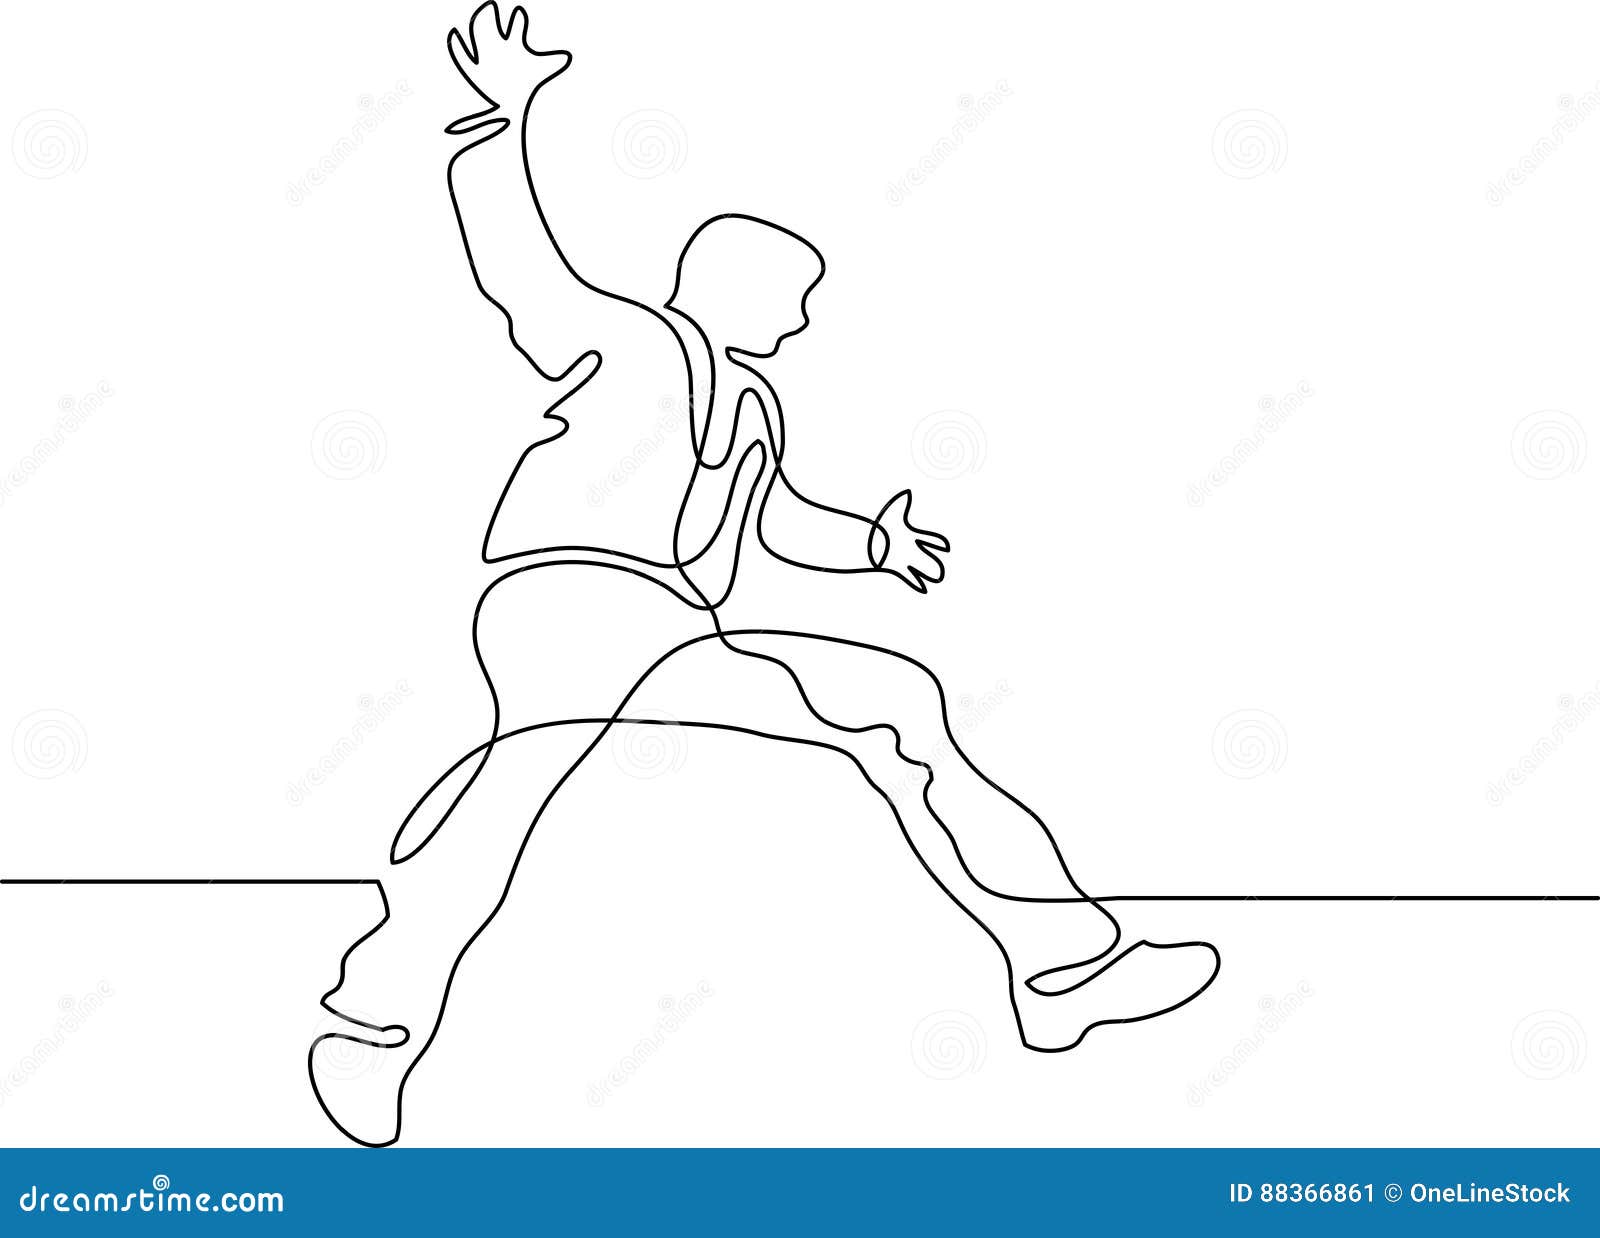 person jumping line drawing